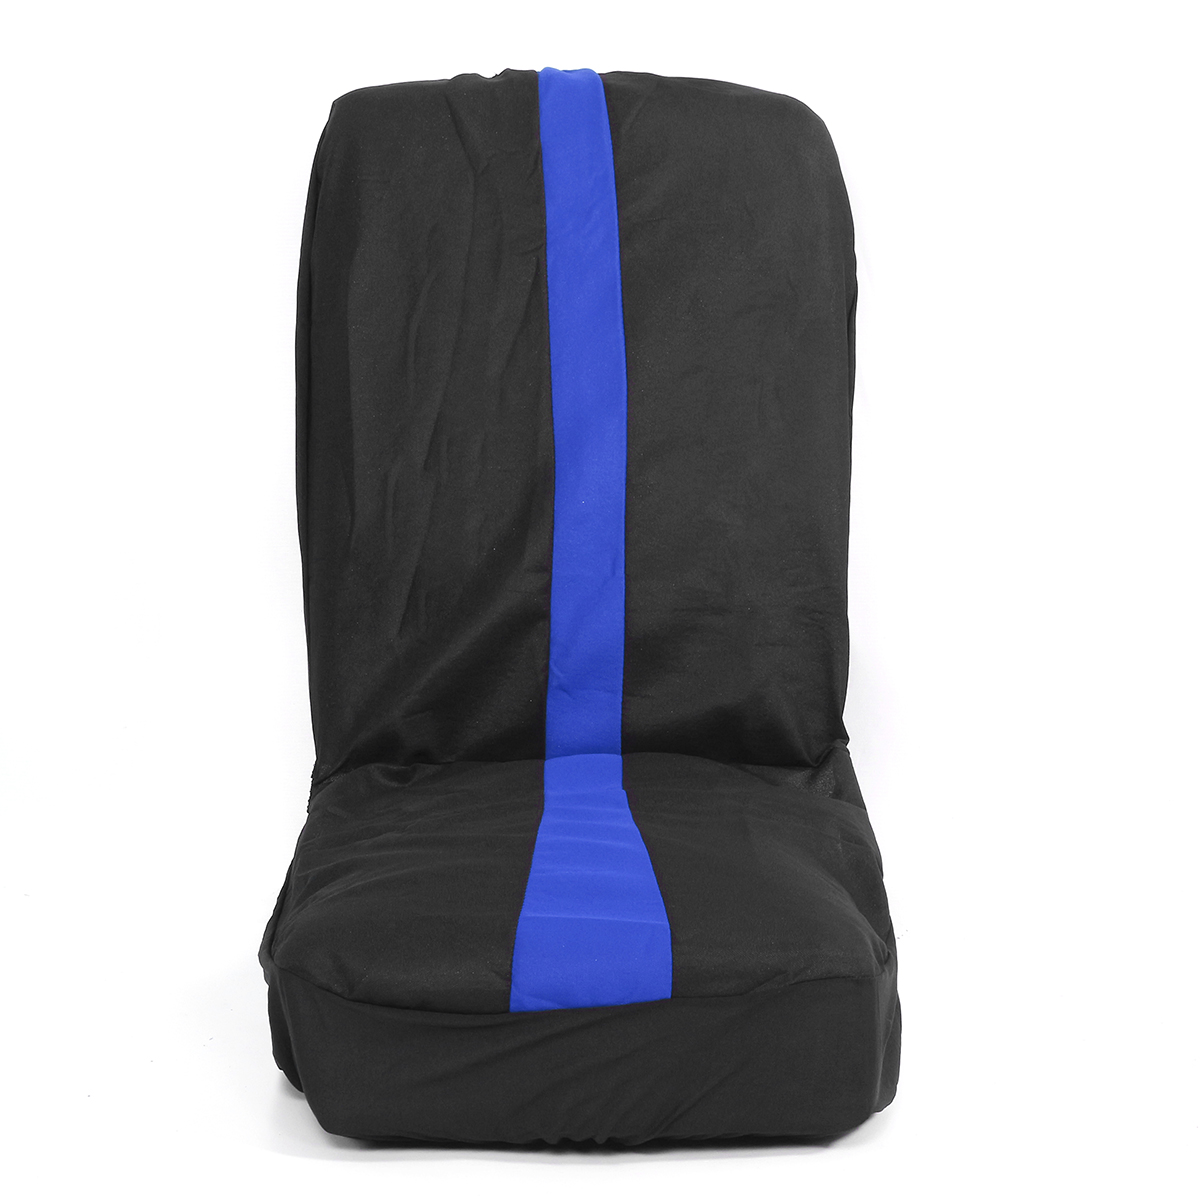 

8Pcs Polyester Fabric Car Front and Back Seat Cover Cushion Protector Universal for Five Seats Car